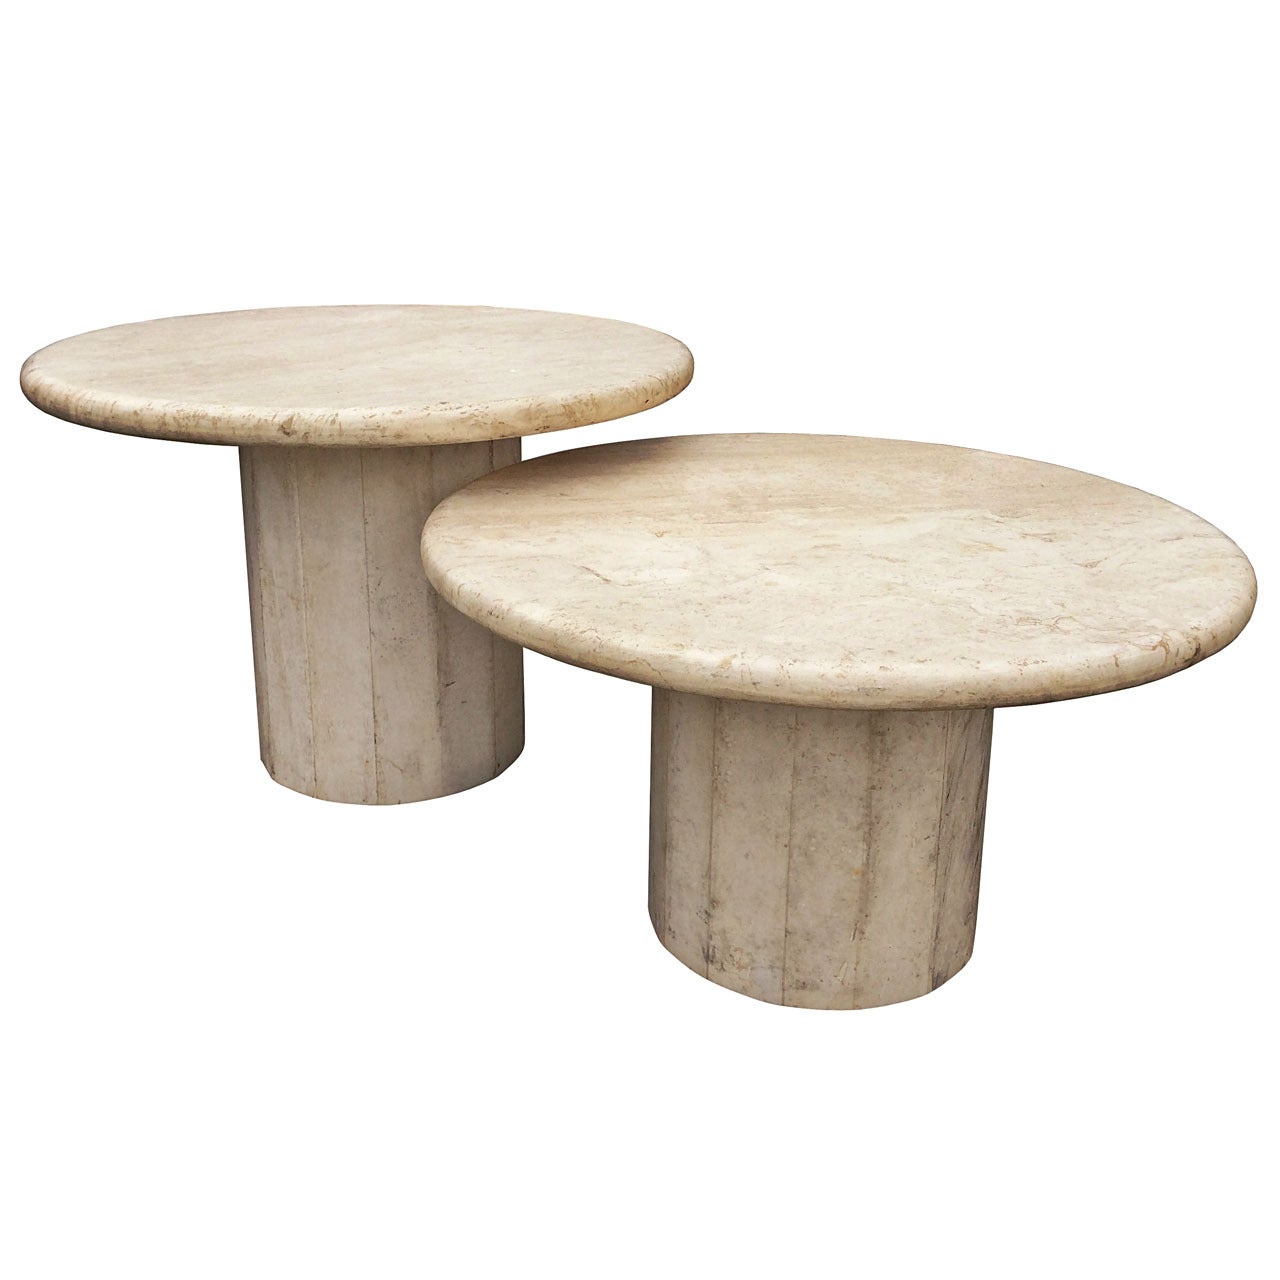 Pair of Travertine Nesting Tables Made in Italy